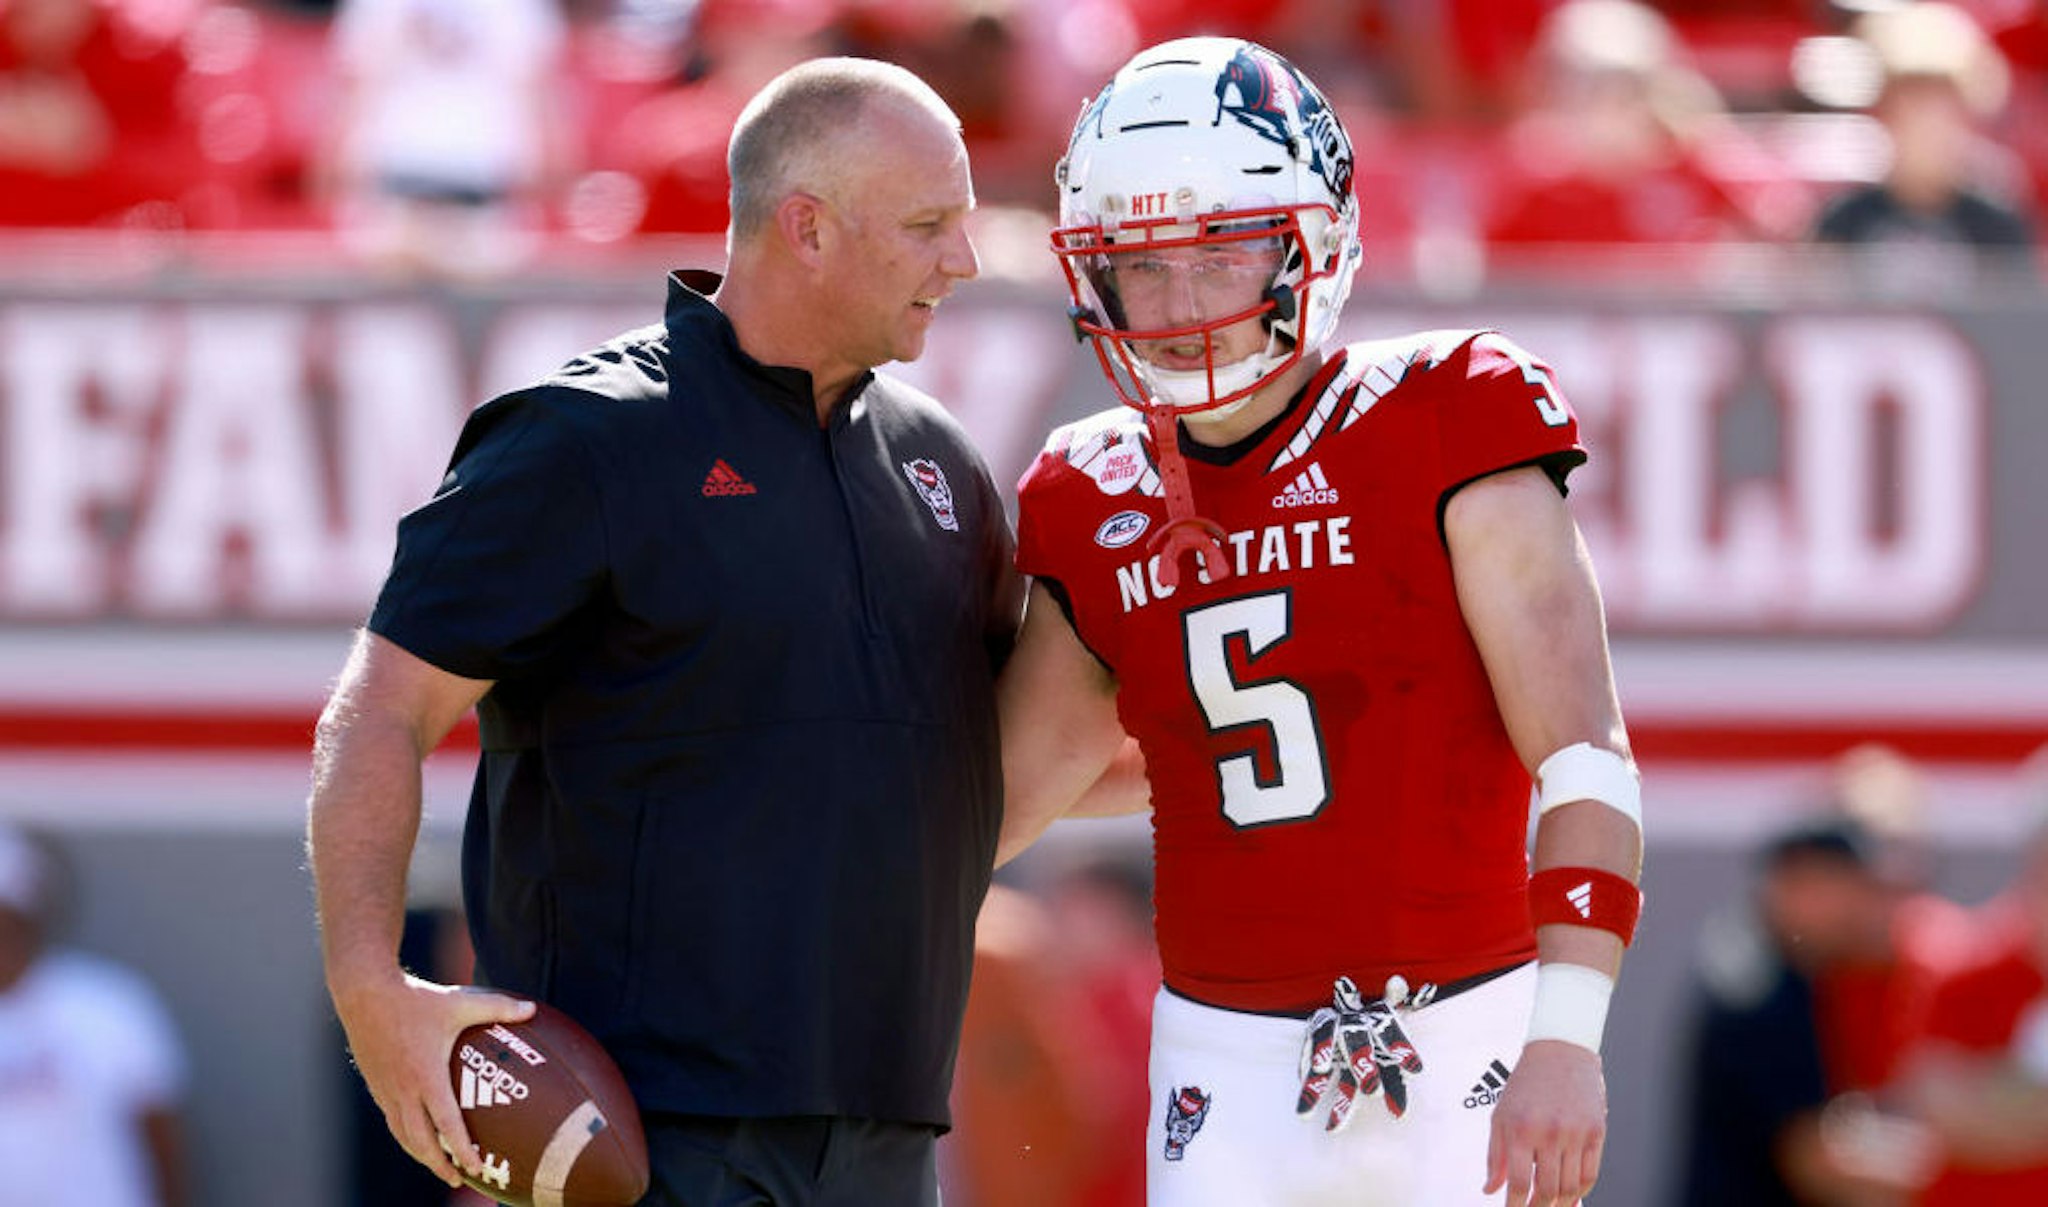 RALEIGH, NORTH CAROLINA - SEPTEMBER 25: Head coach Dave Doeren talks with Thayer Thomas #5 of the North Carolina State Wolfpack during their game against the Clemson Tigers at Carter-Finley Stadium on September 25, 2021 in Raleigh, North Carolina. North Carolina State won 27-21 in double overtime. (Photo by Grant Halverson/Getty Images)